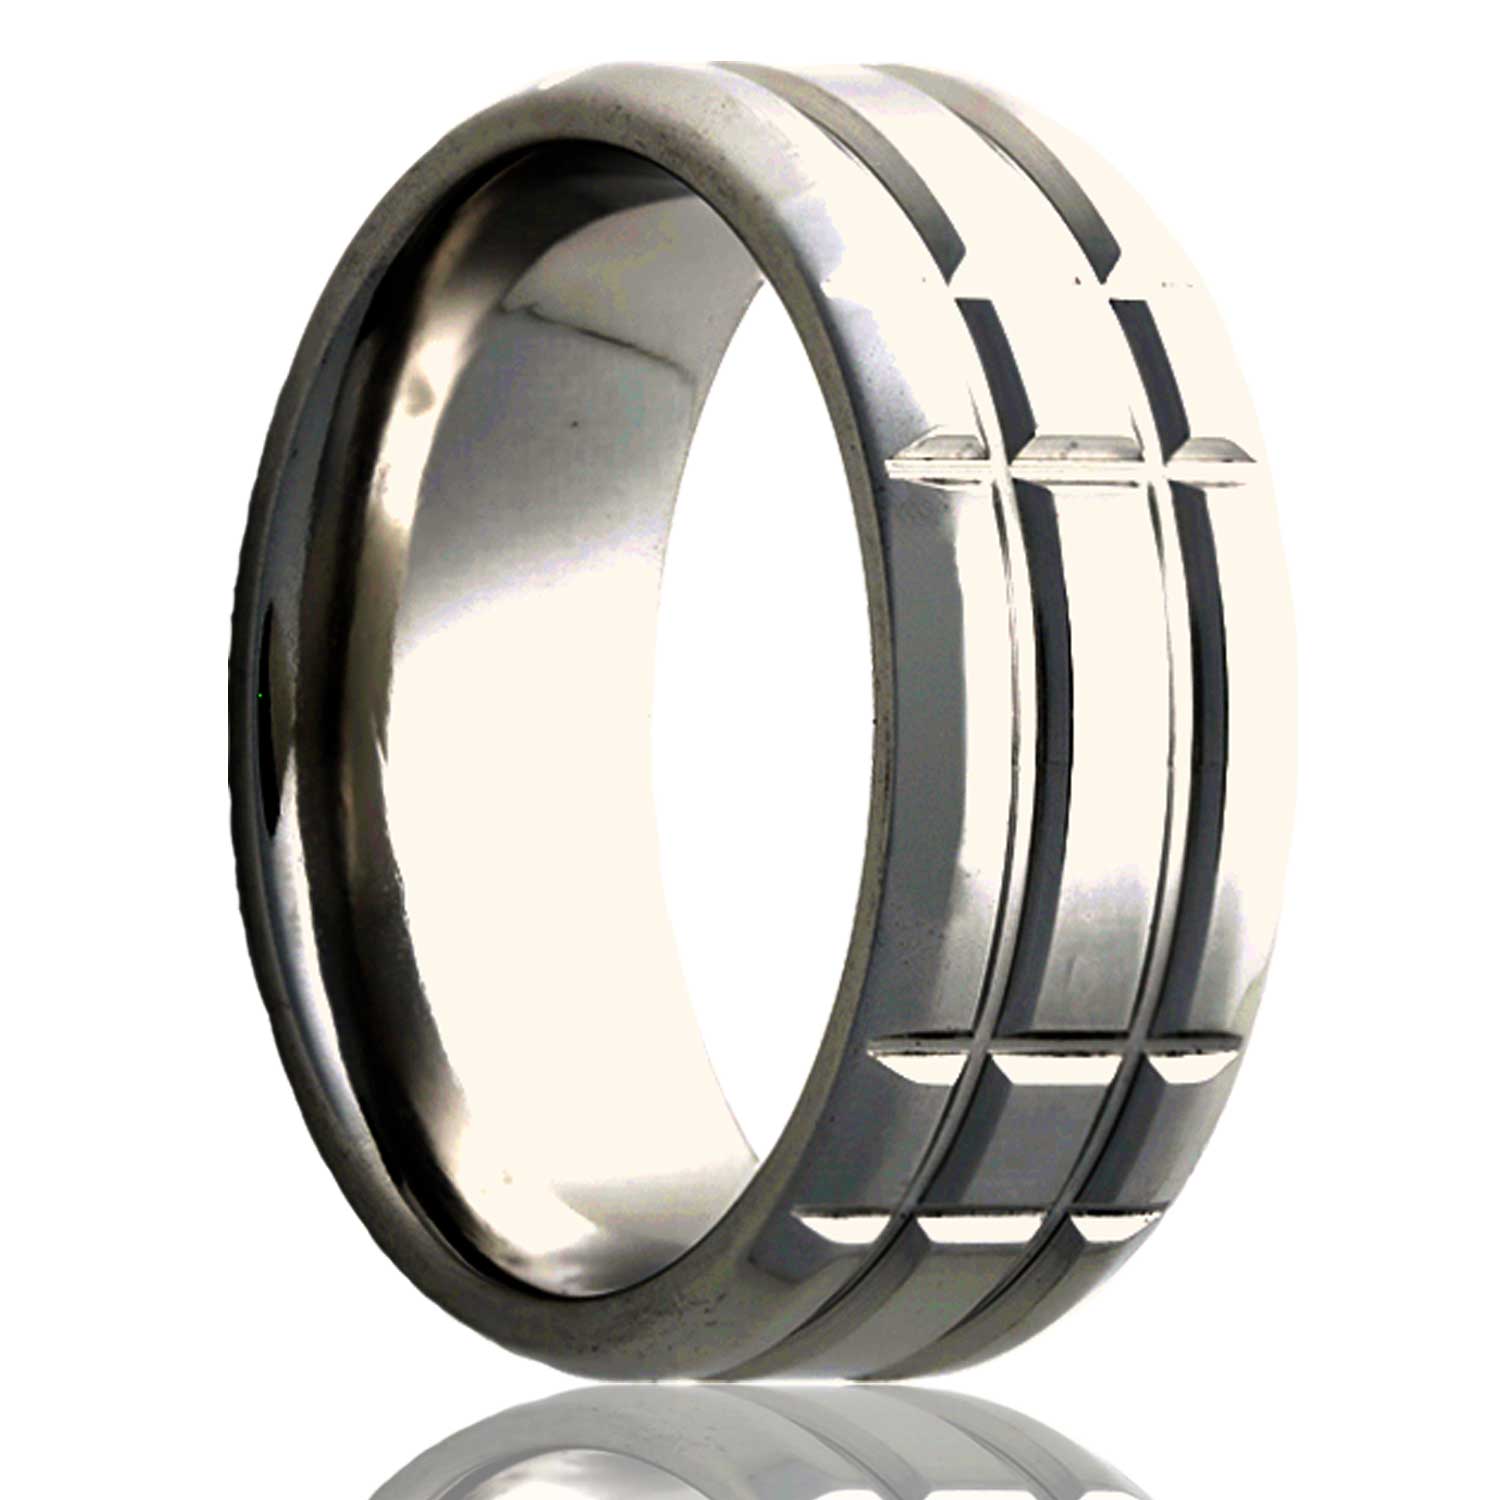 A titanium wedding band with beveled edges displayed on a neutral white background.